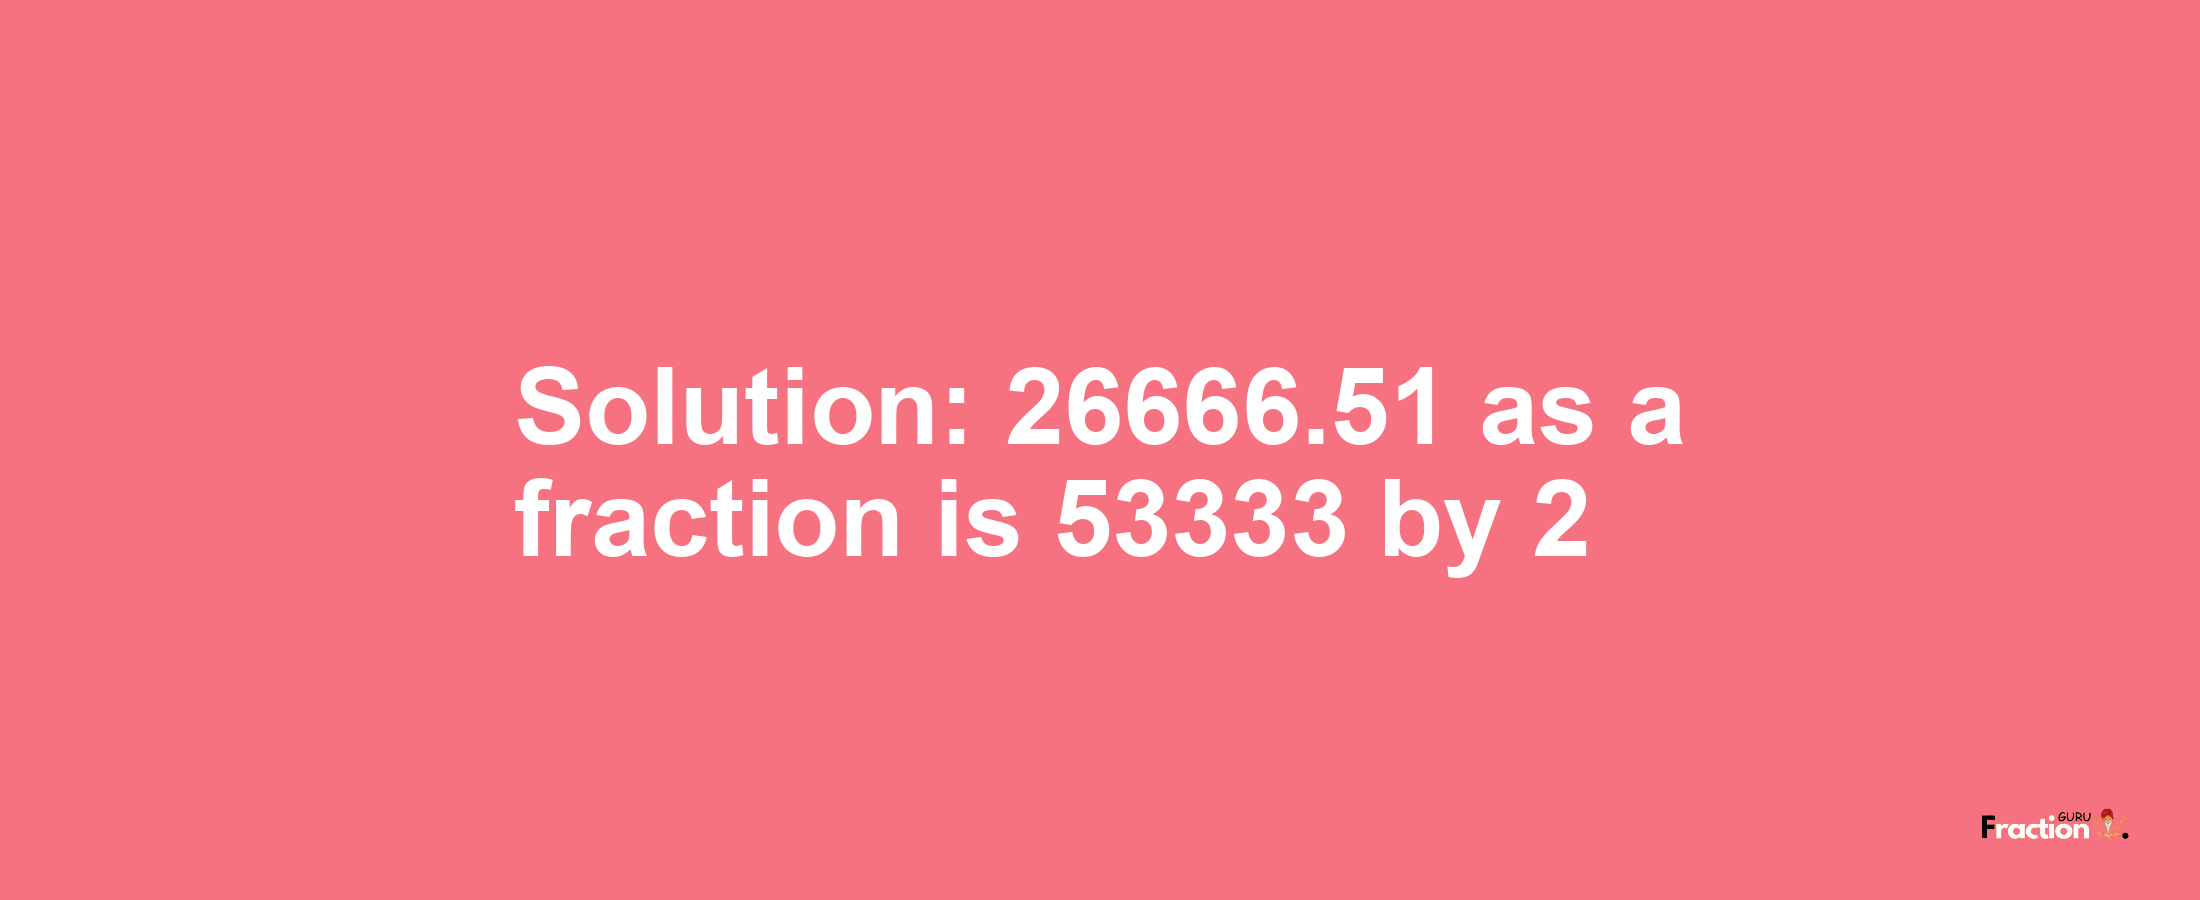 Solution:26666.51 as a fraction is 53333/2